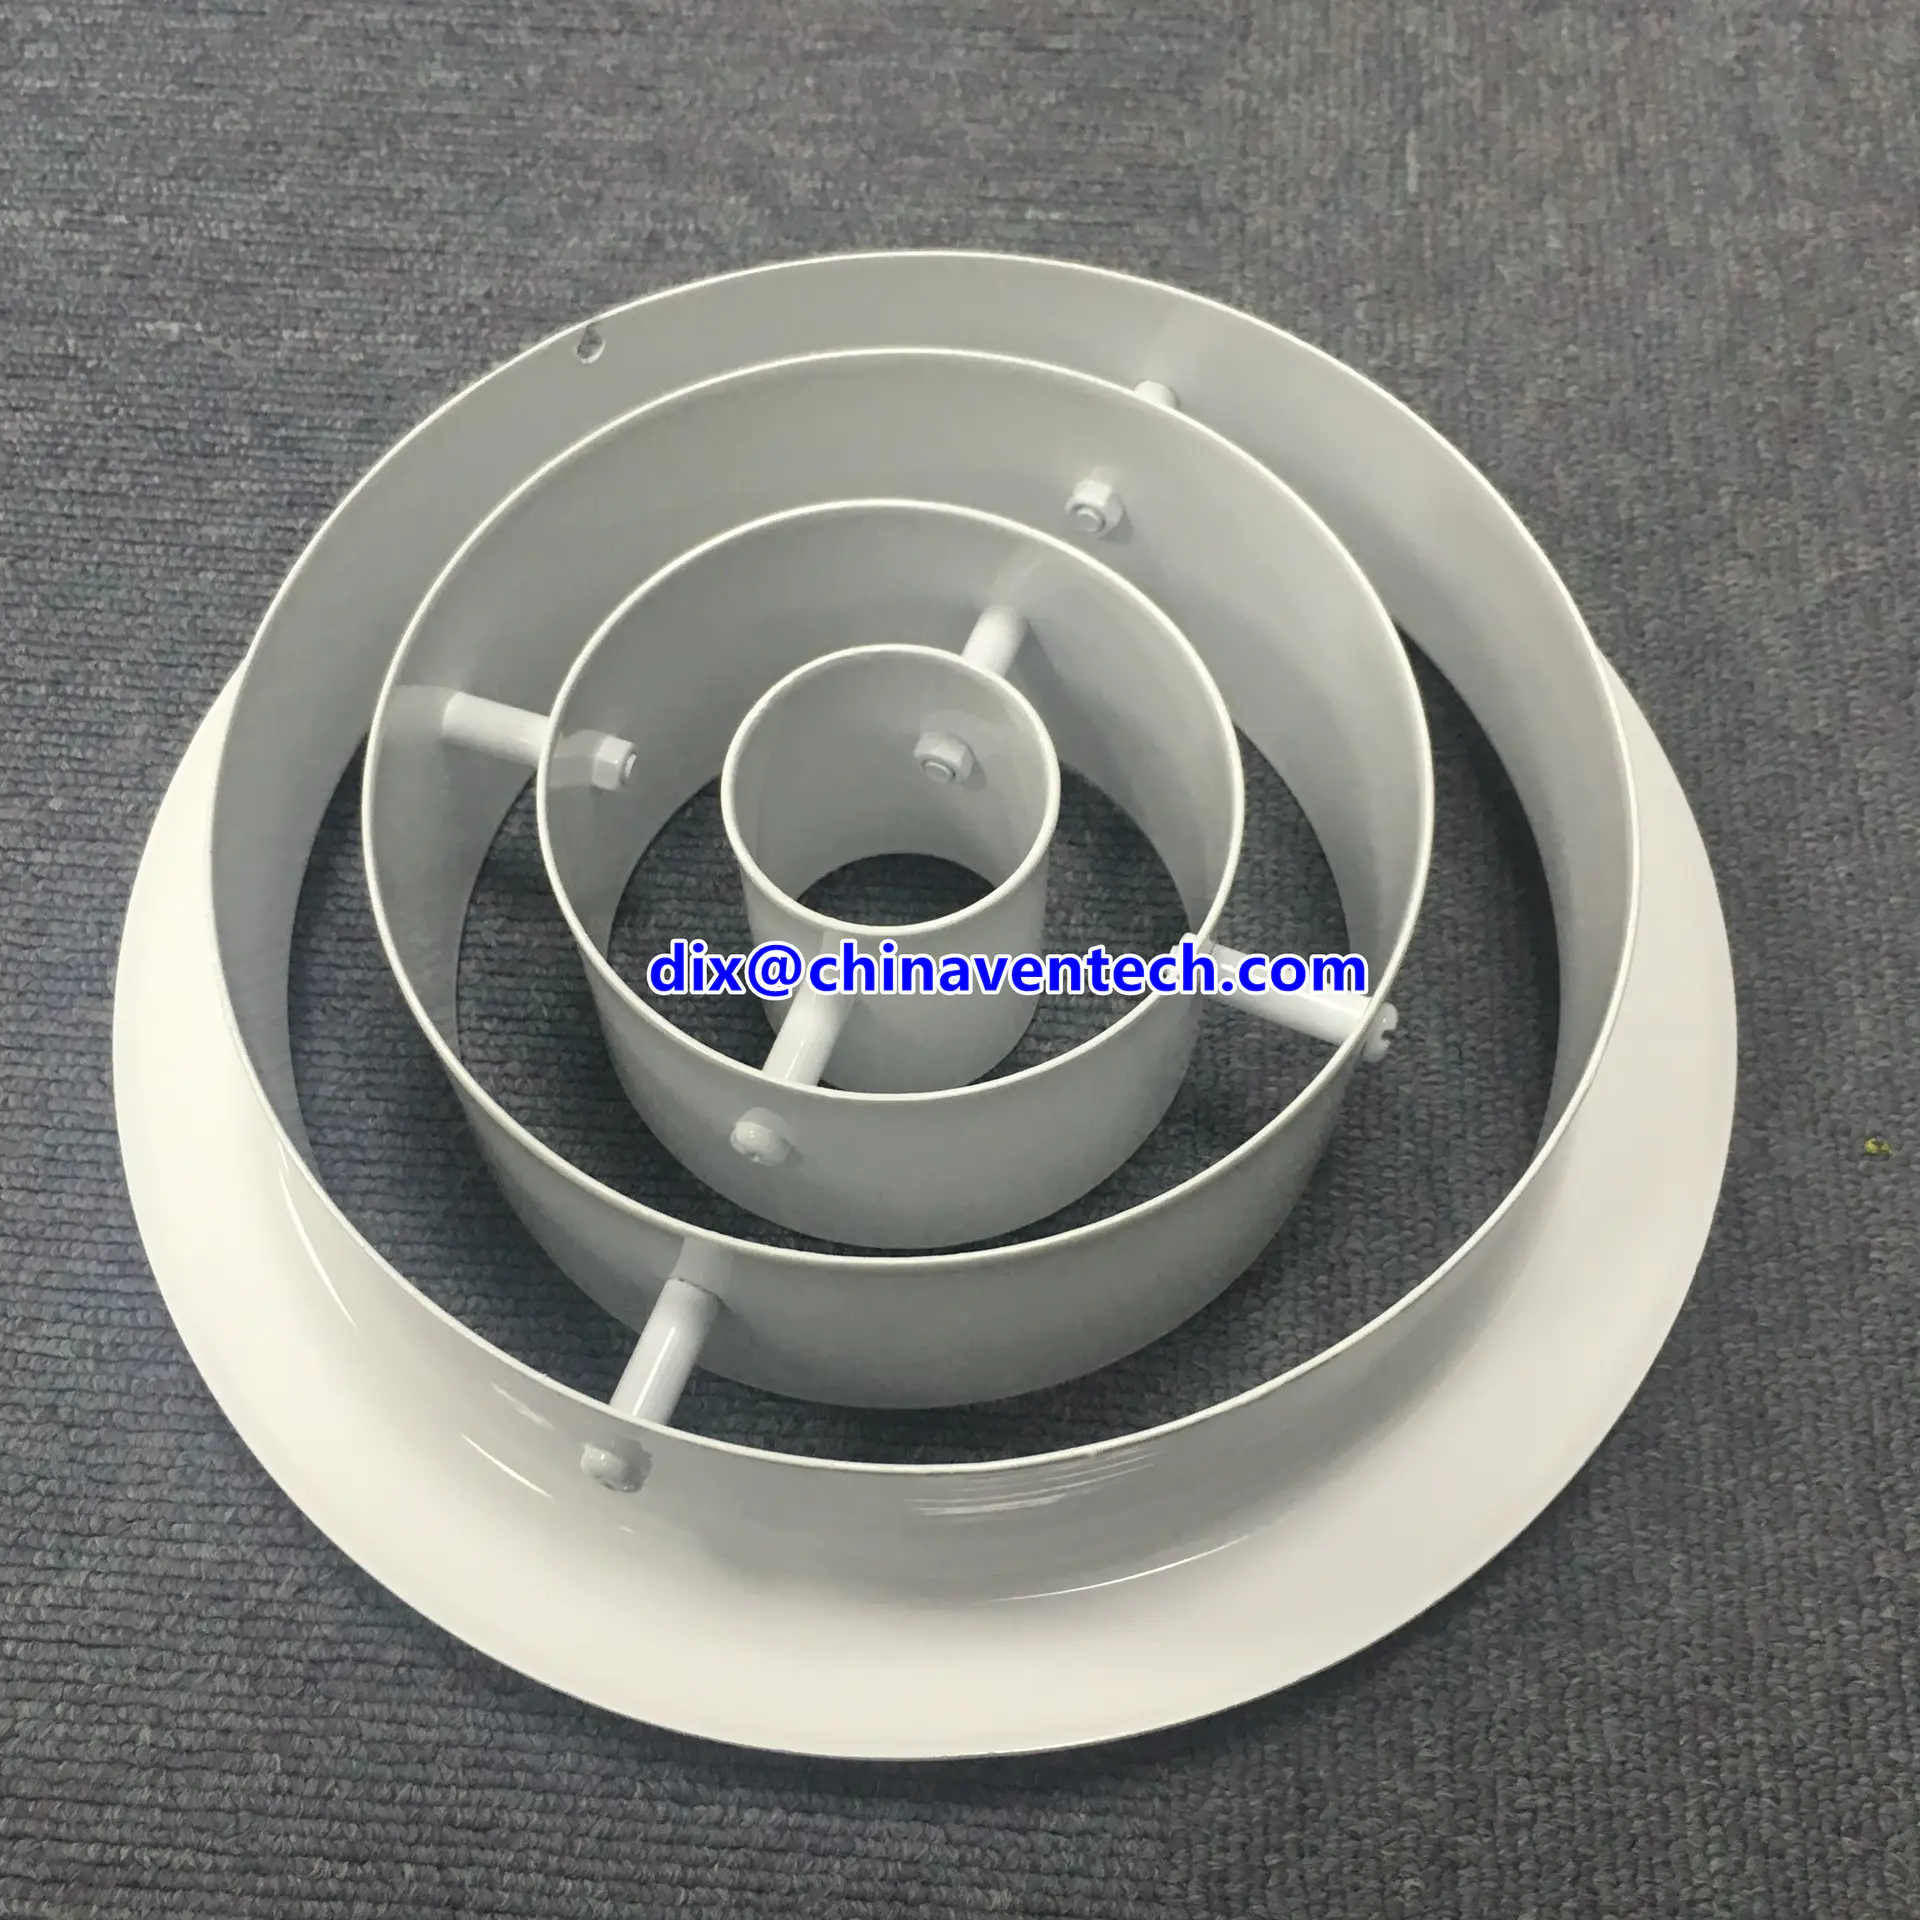 Hvac ceiling mounted jet nozzle adjustable ring cones round jet diffuser